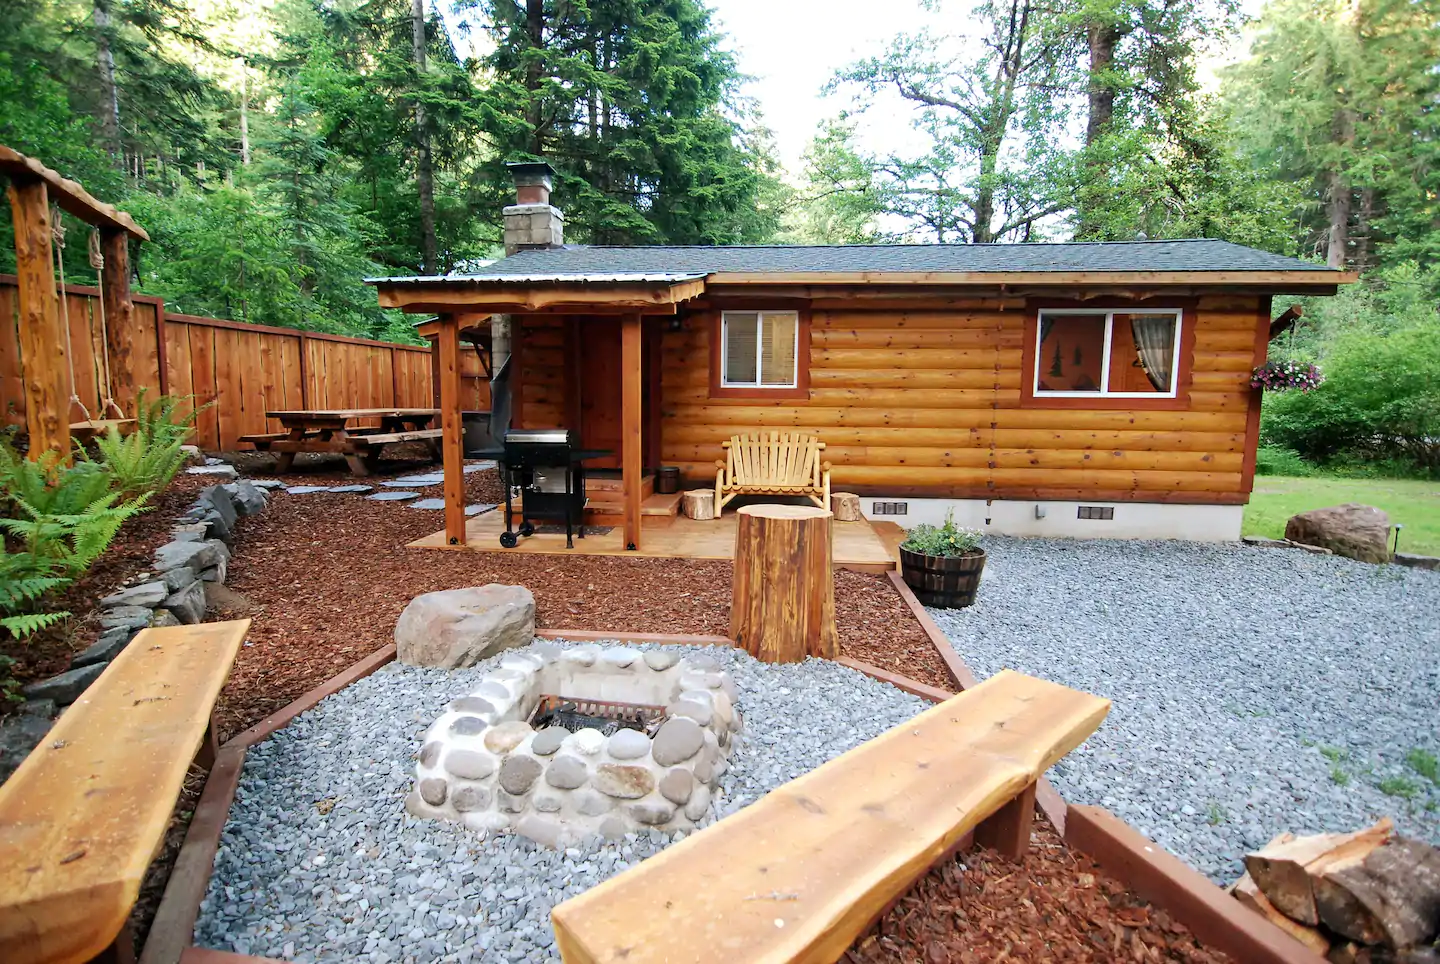 Create a Rustic Fire for a Log Cabin